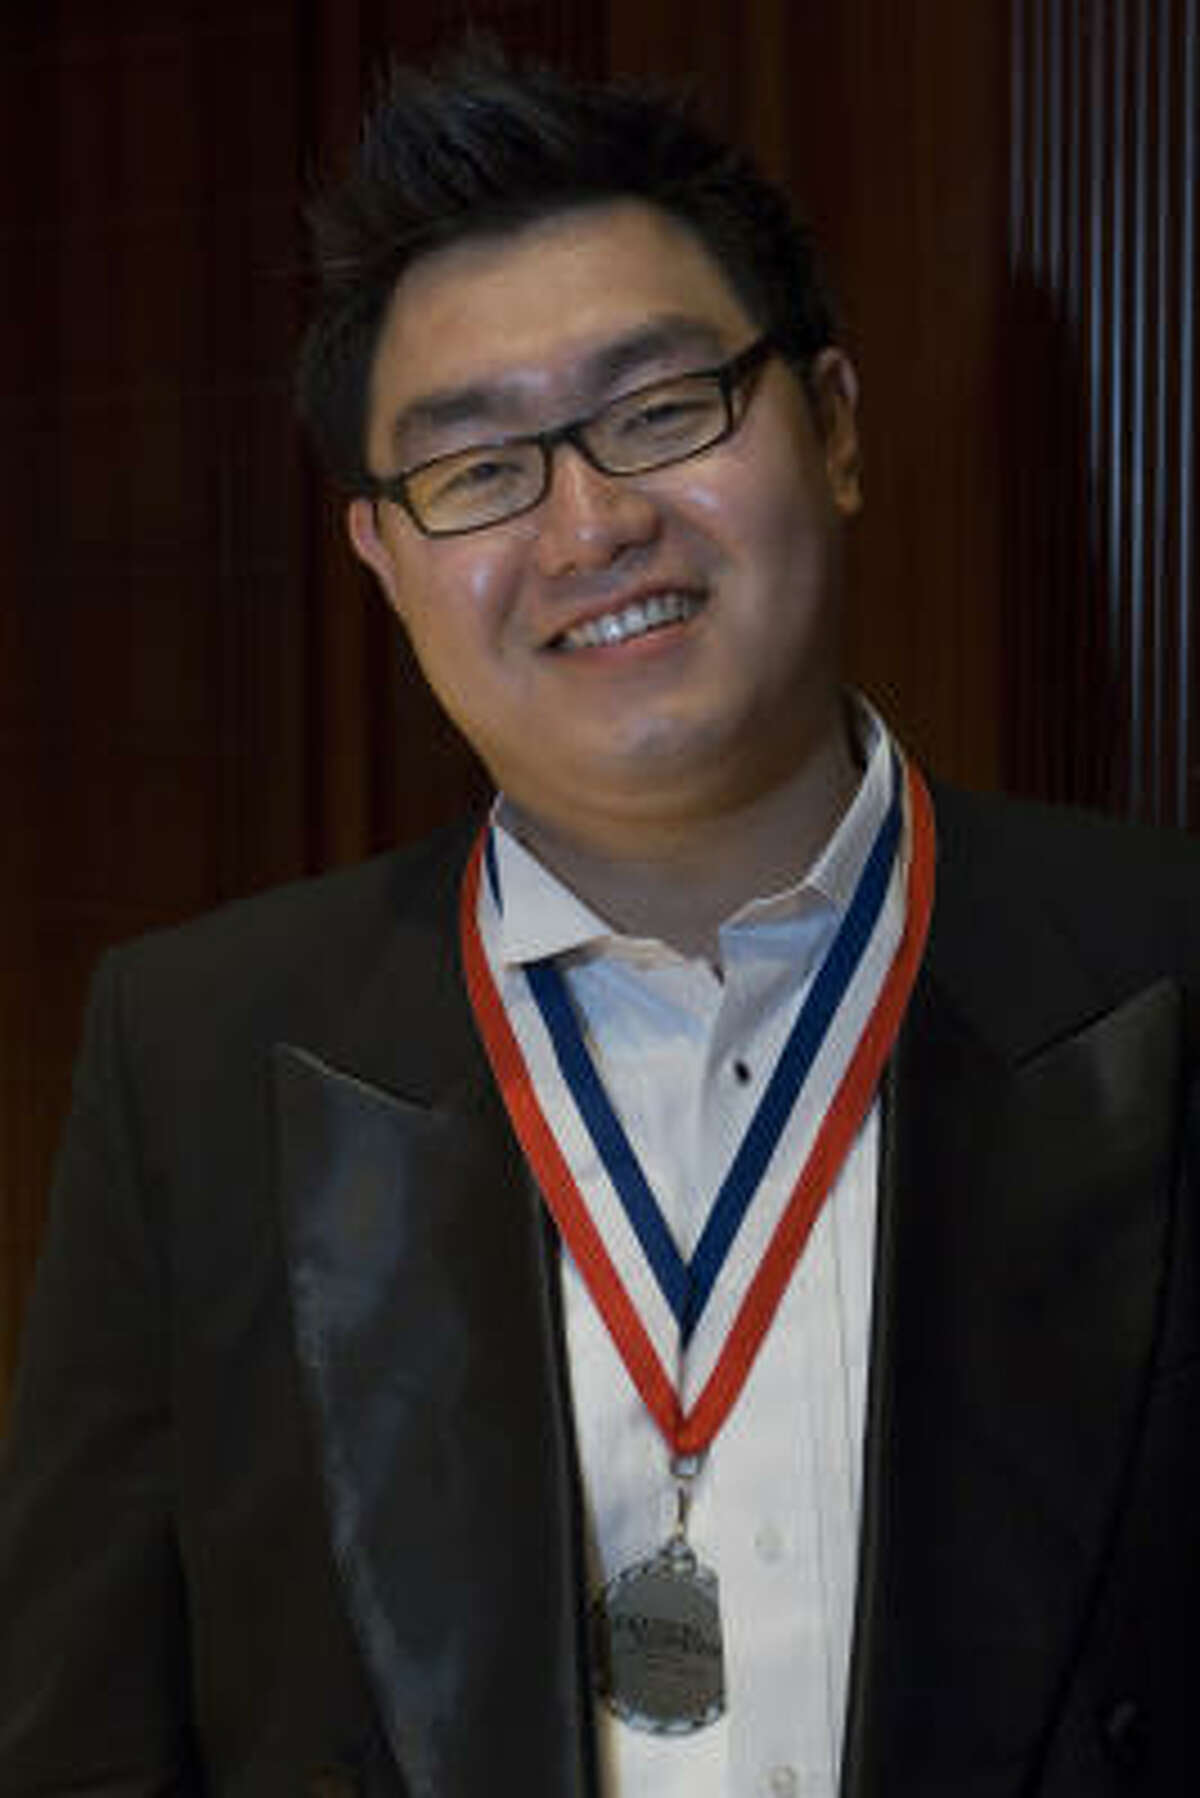 Kwan Yi, winner of the 2007 Ima Hogg Young Artist Competition, will perform with the Houston Symphony Sunday.